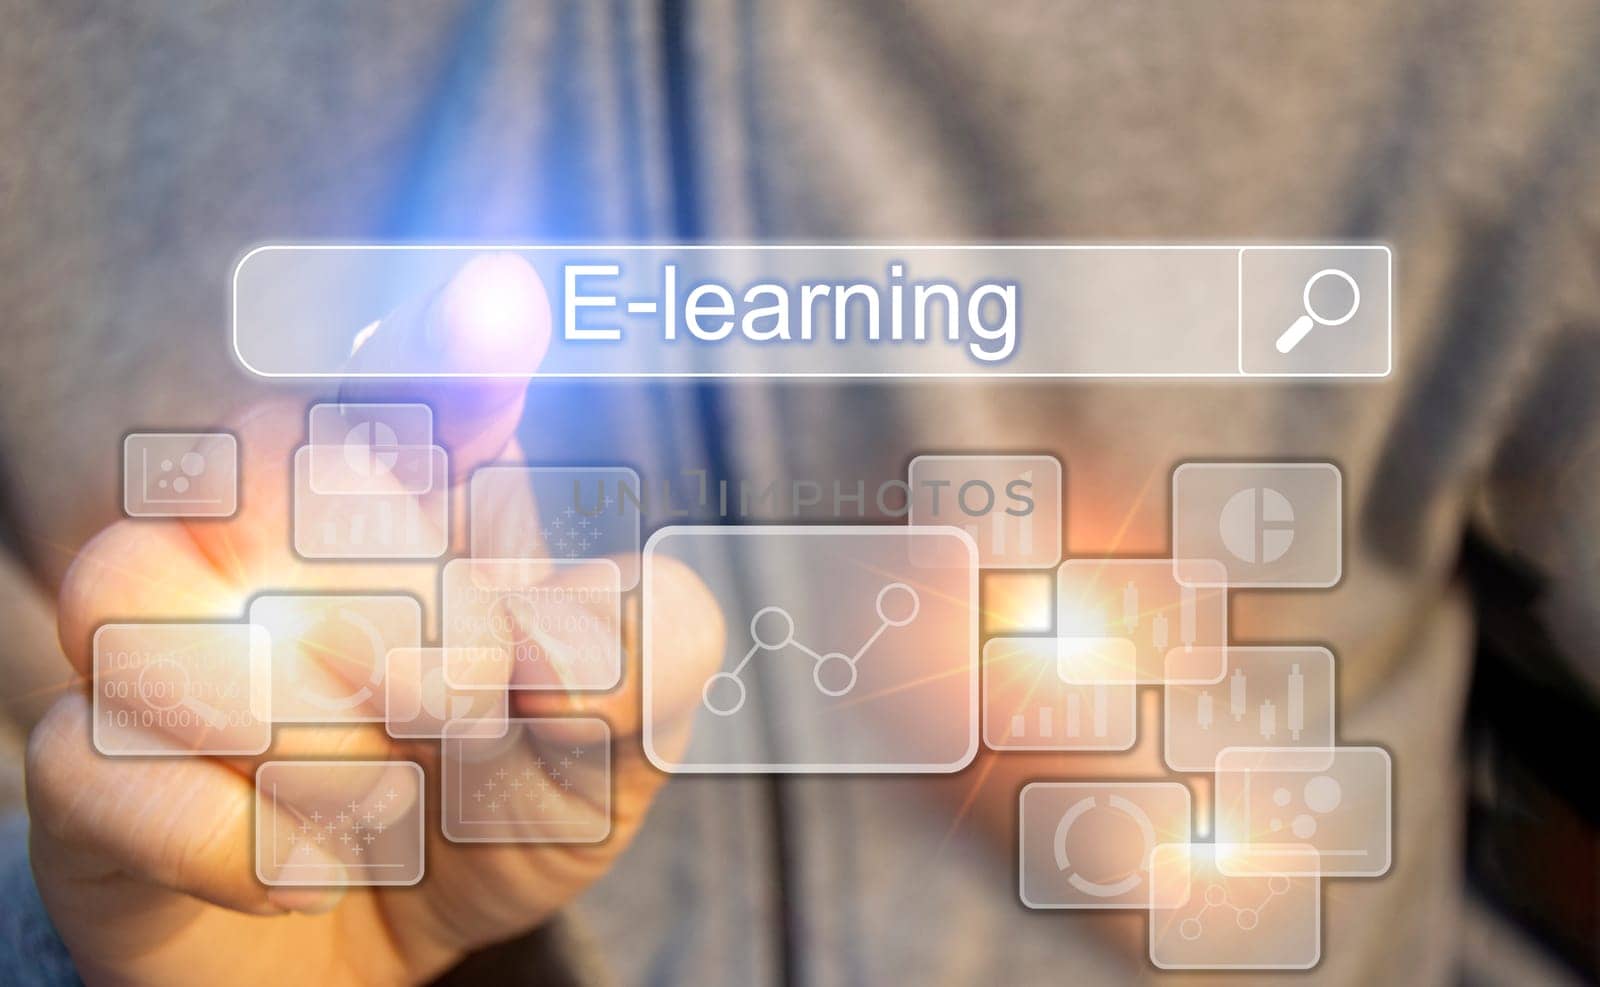 Concept of e-Learning, a learning management system through a network (Learning Management System) with an emphasis on learners as the center. in teaching and learning Blended style with regular class by boonruen